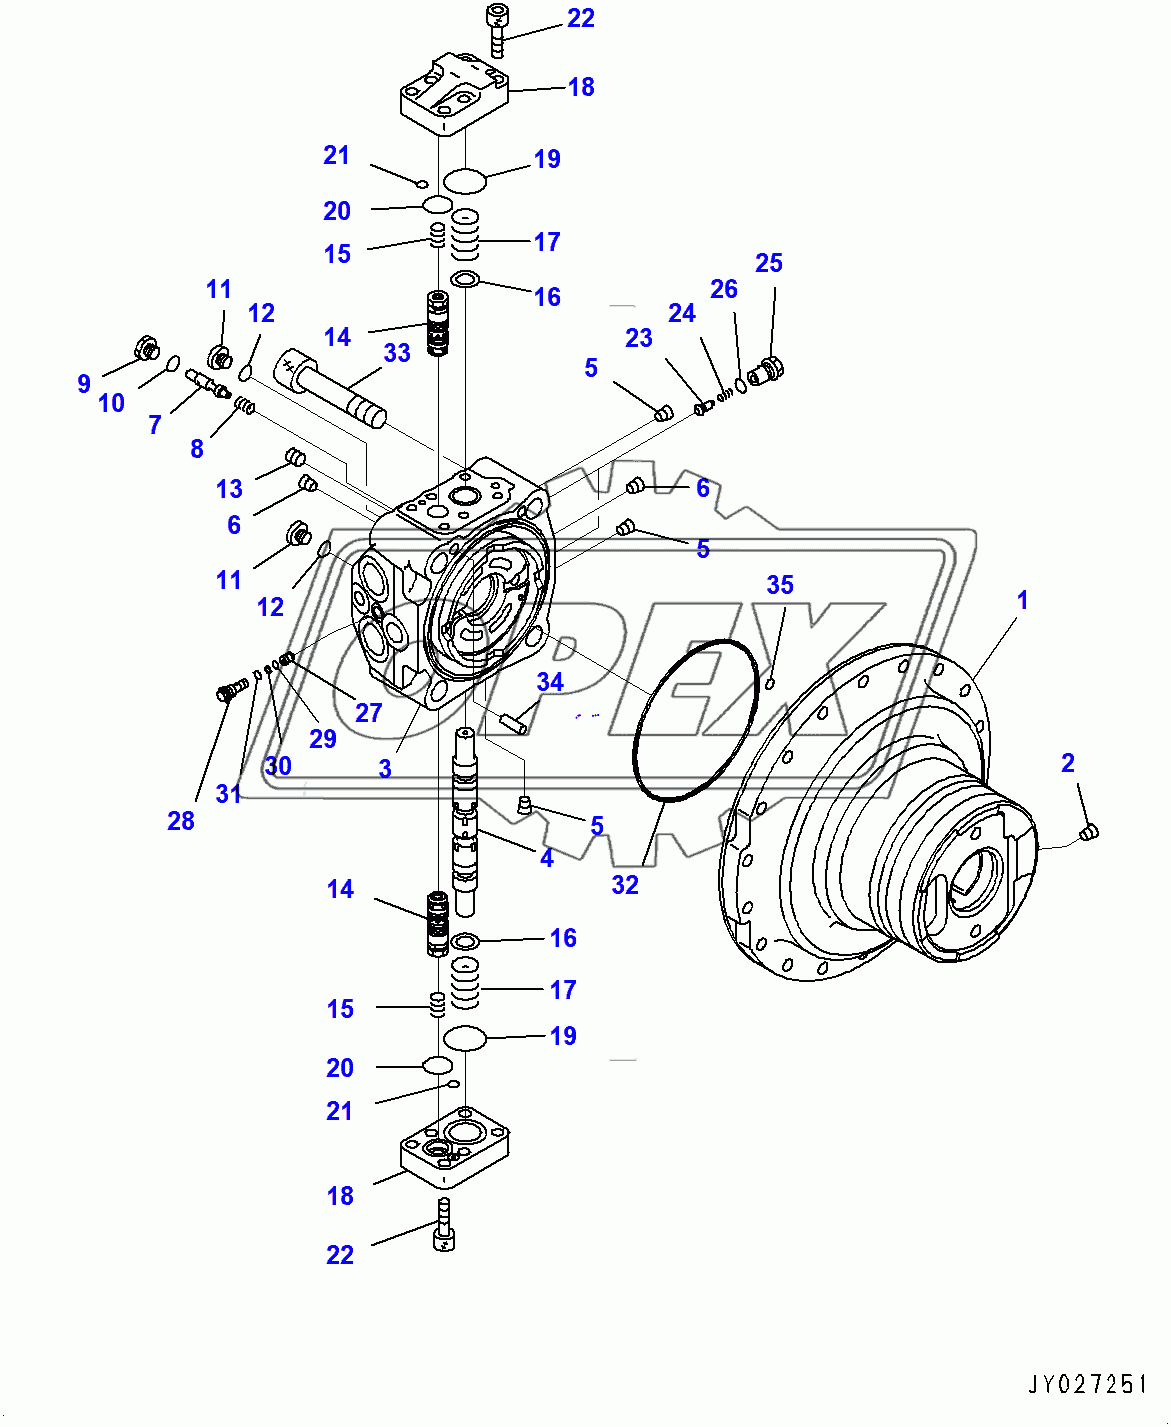  Travel Motor and Final Drive, Travel Motor  (1/2) (400082-400126)